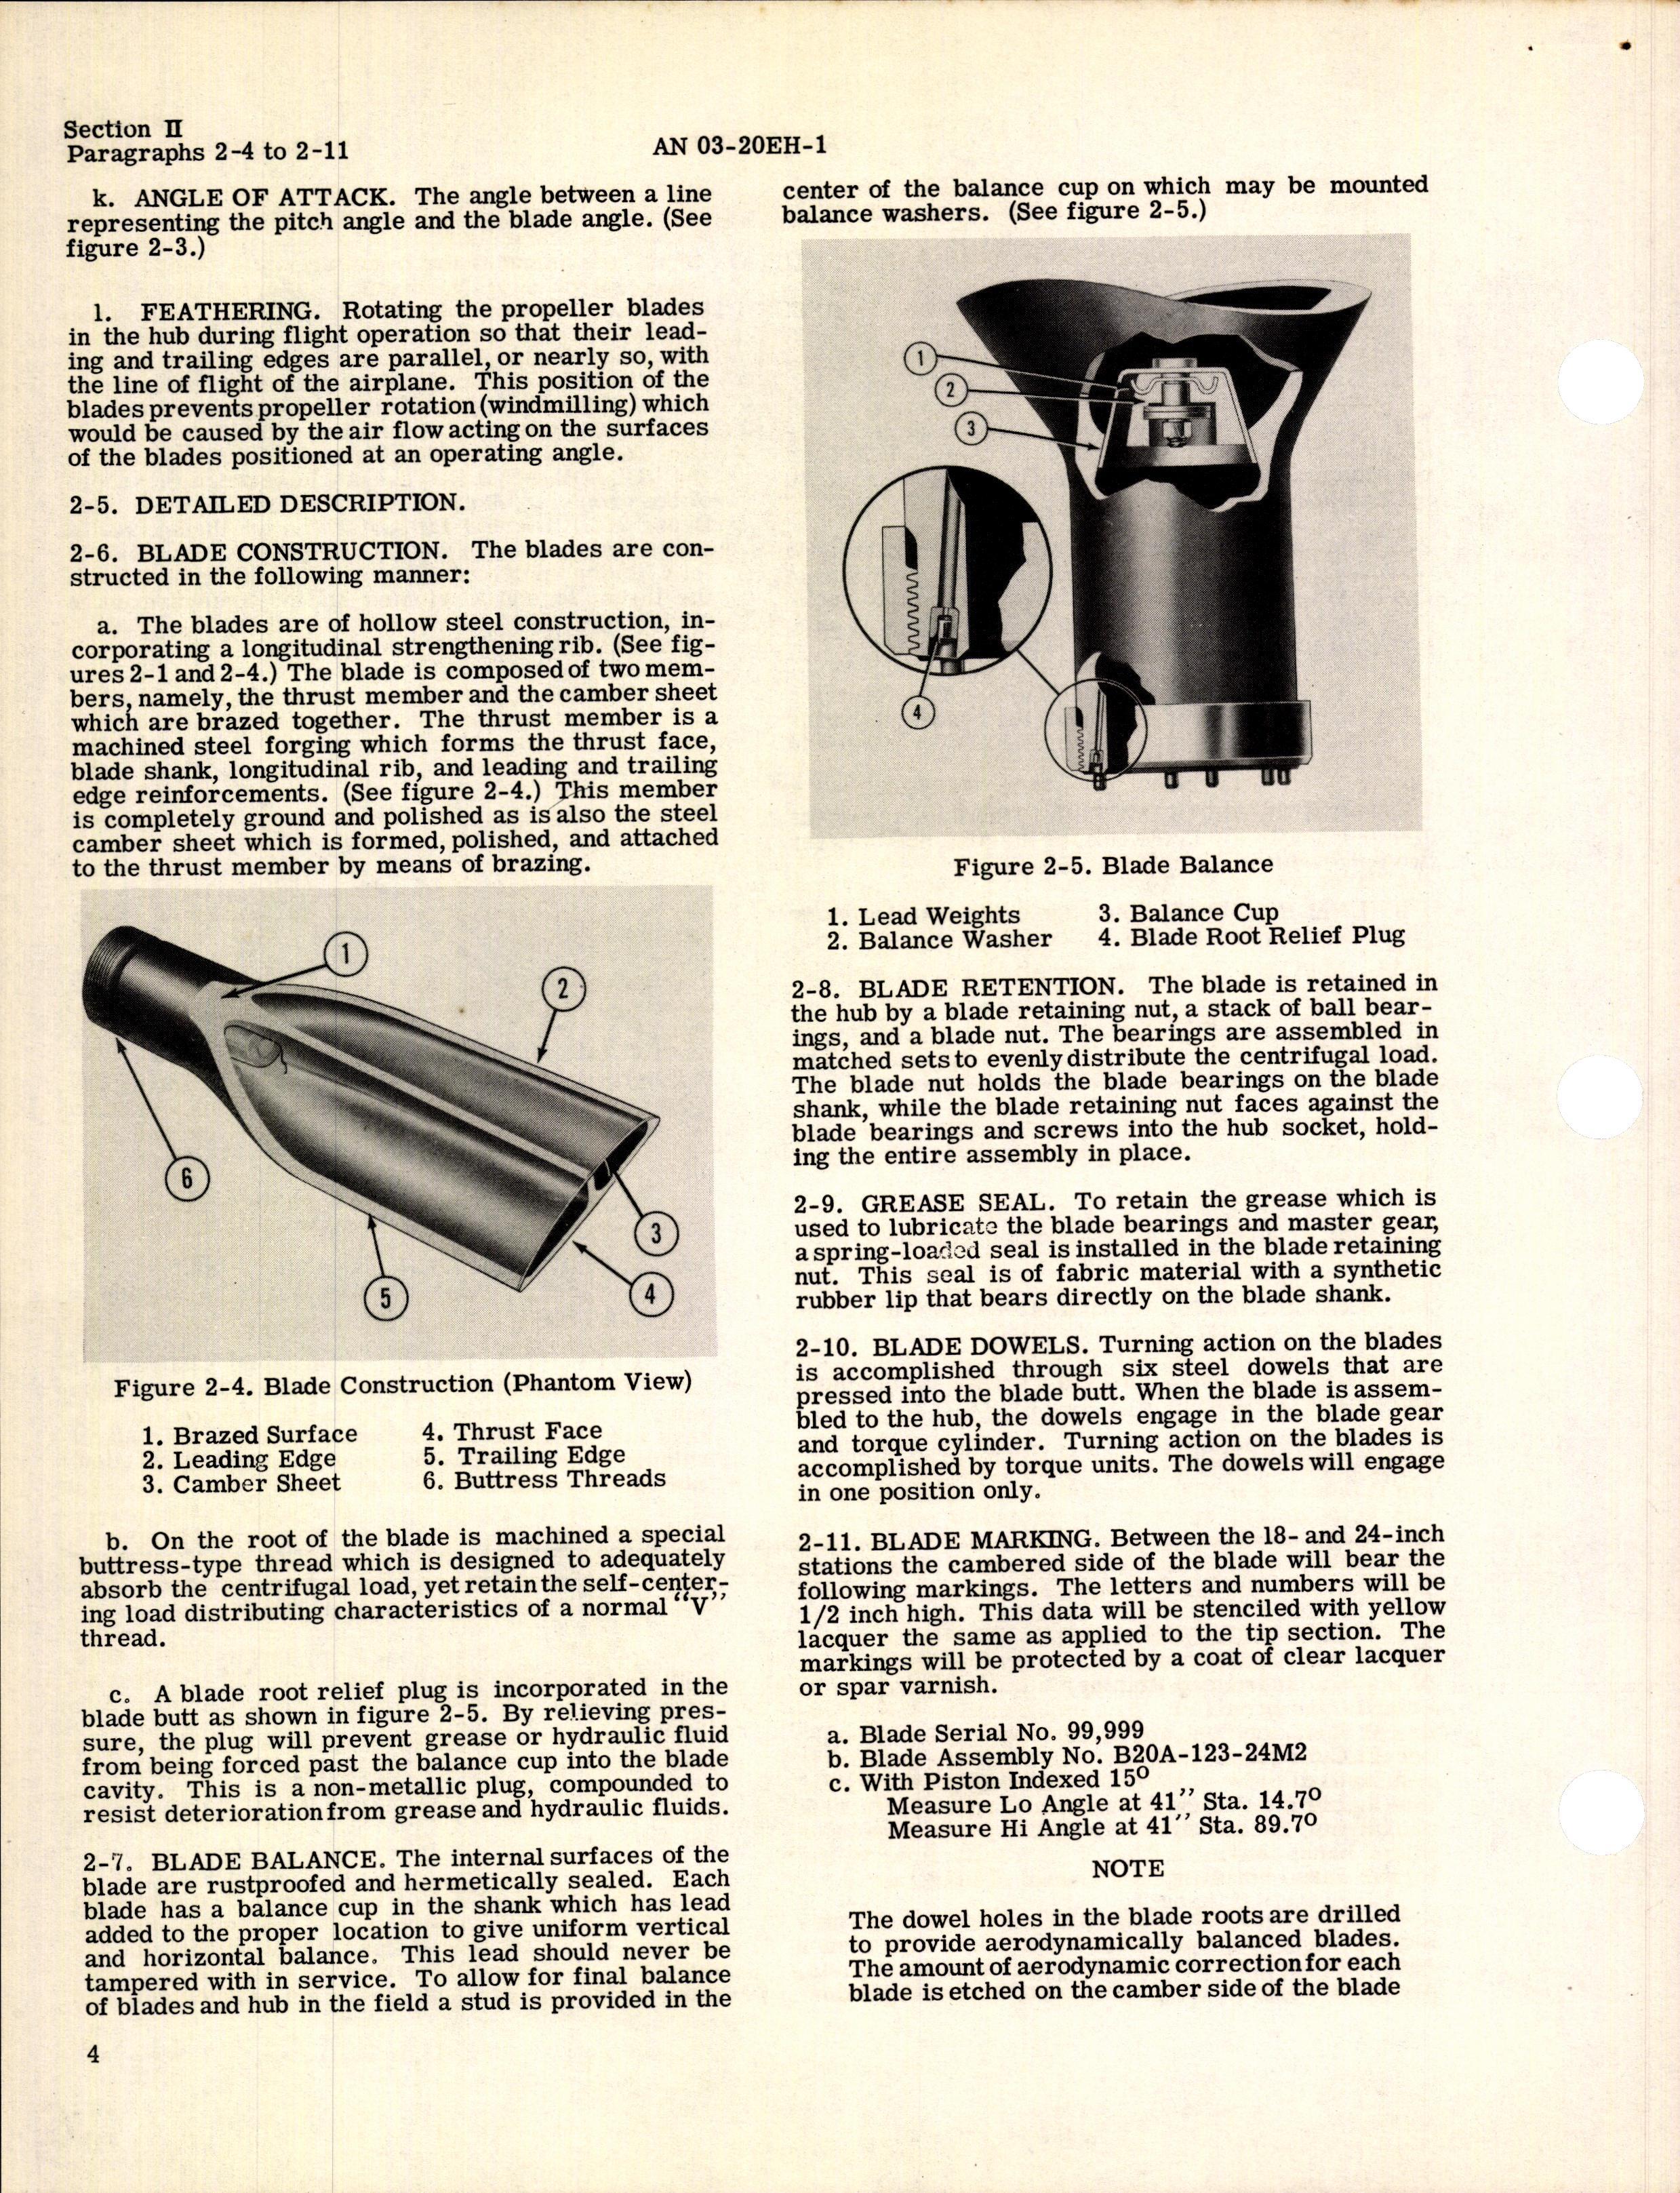 Sample page 8 from AirCorps Library document: Operation and Service Instructions for Hydraulic Propeller